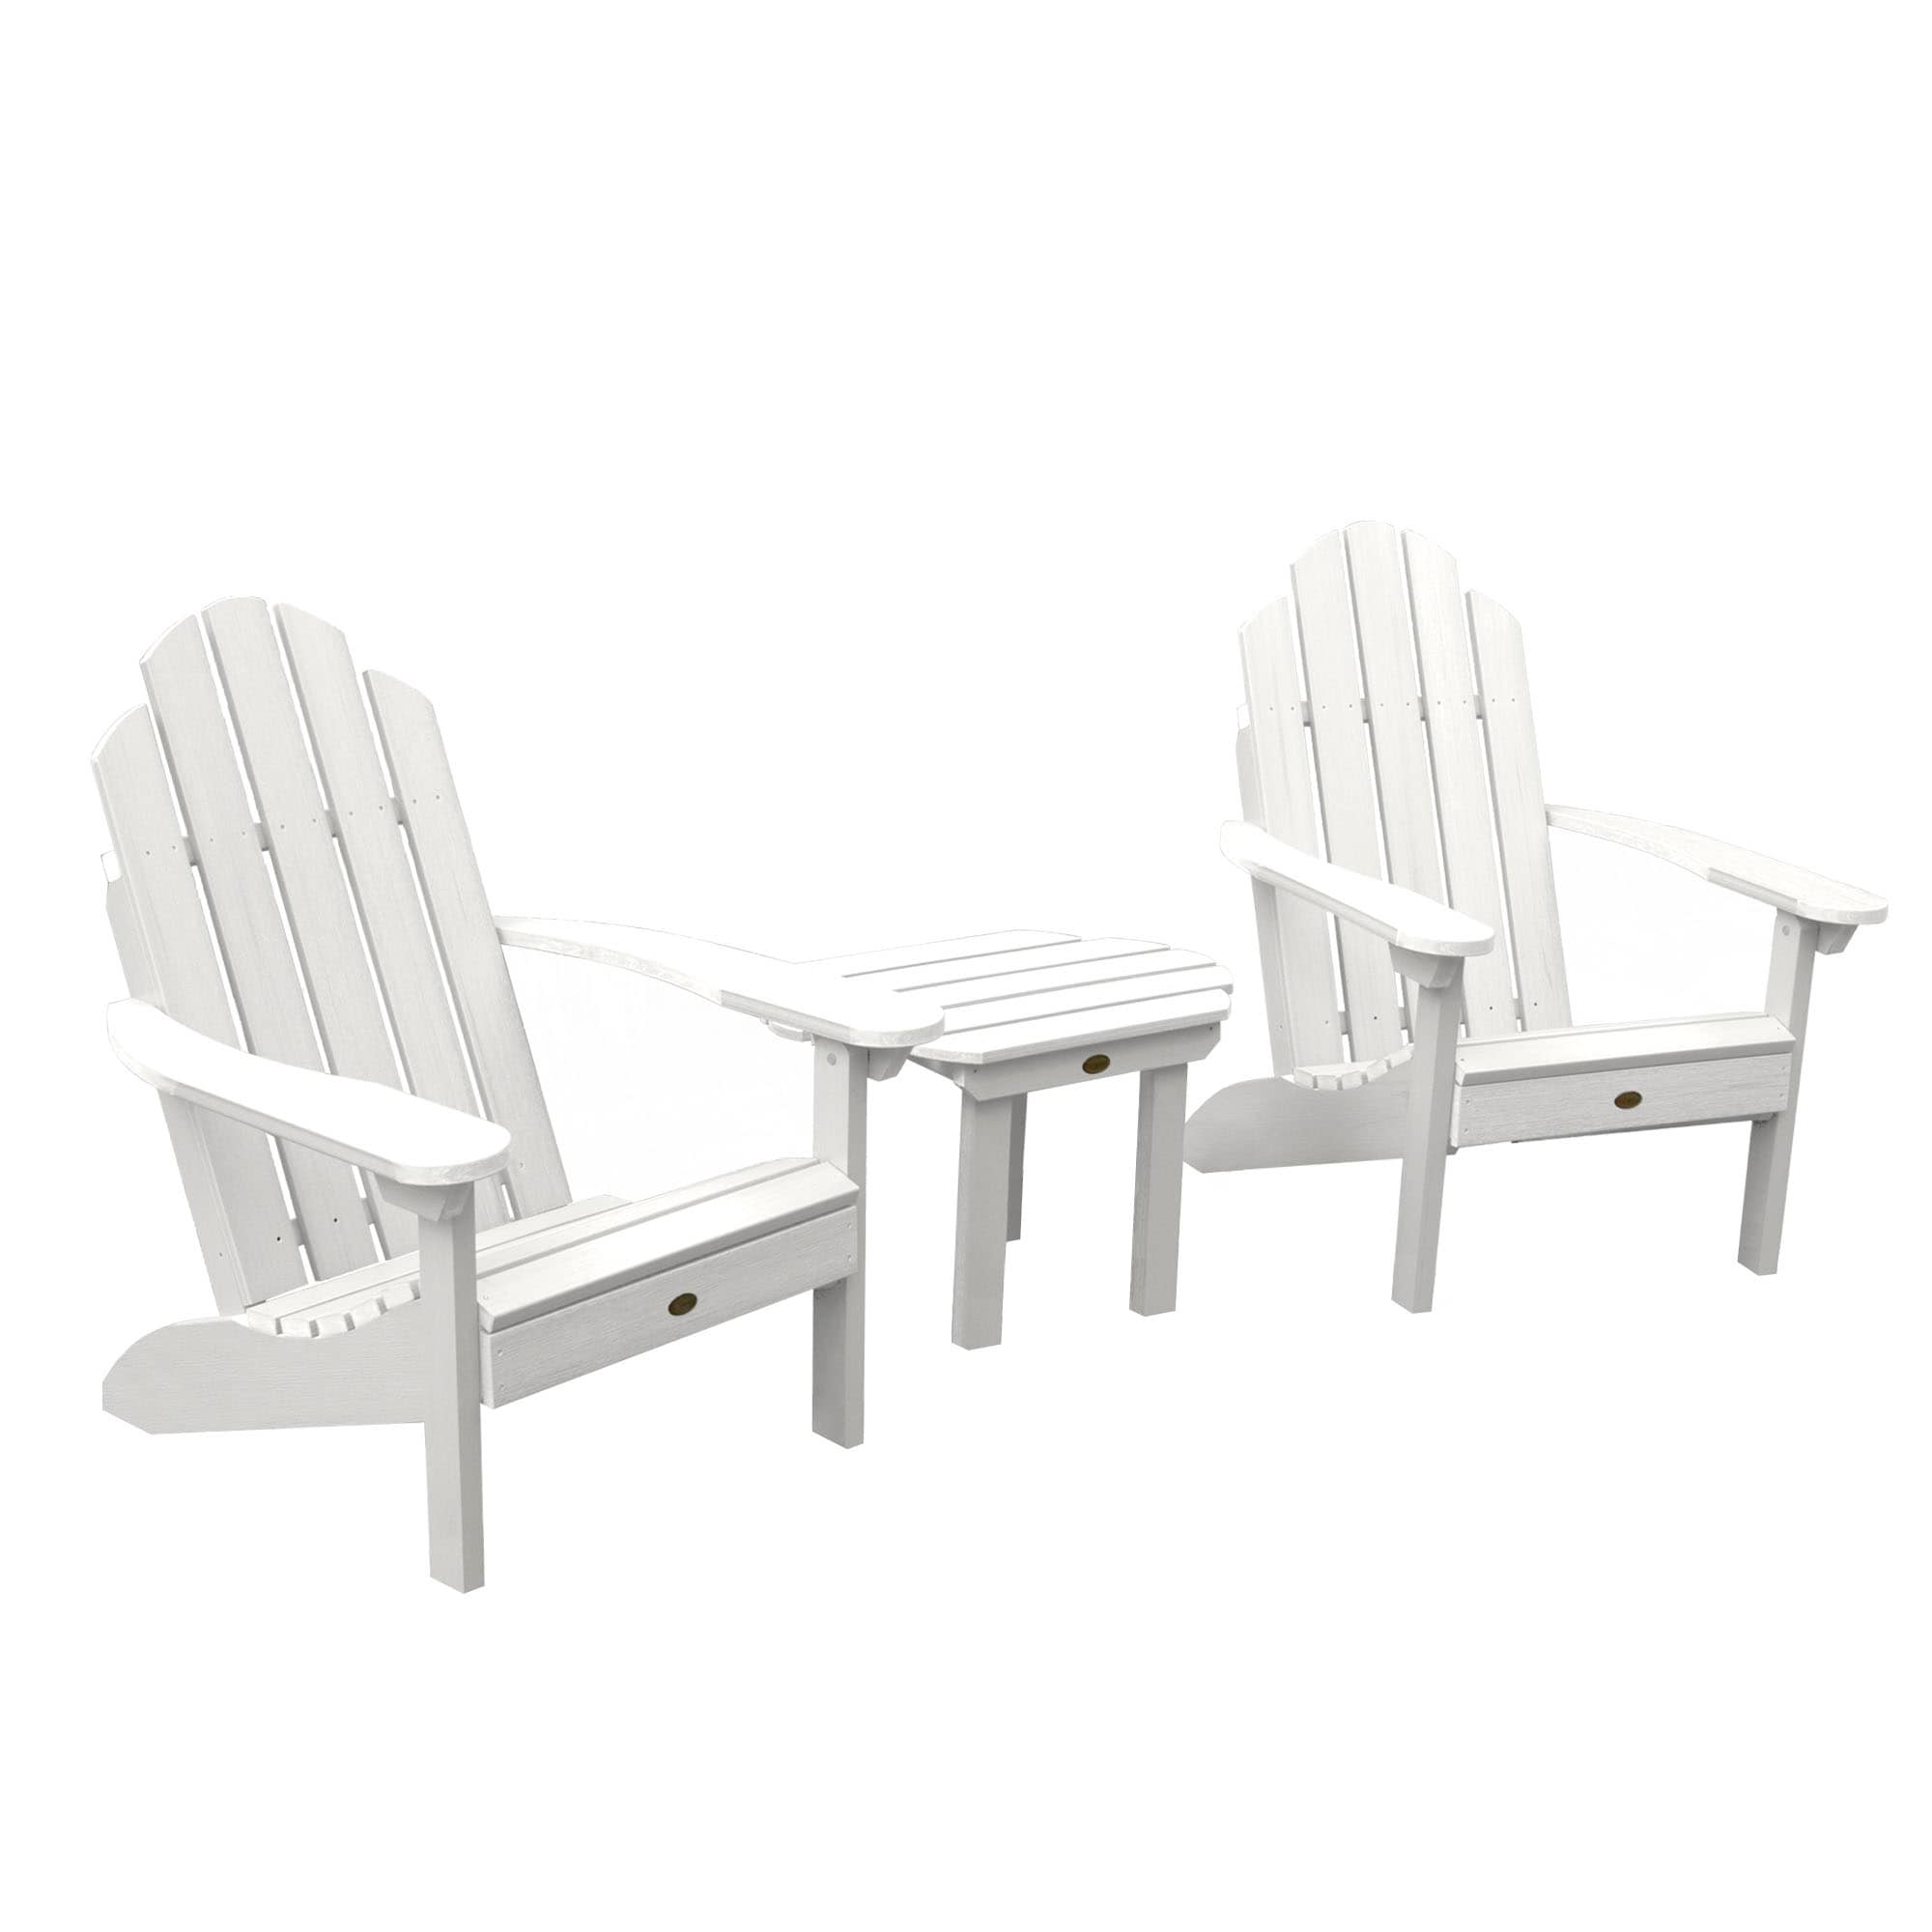 2 Classic Westport Adirondack Chairs And Side Table